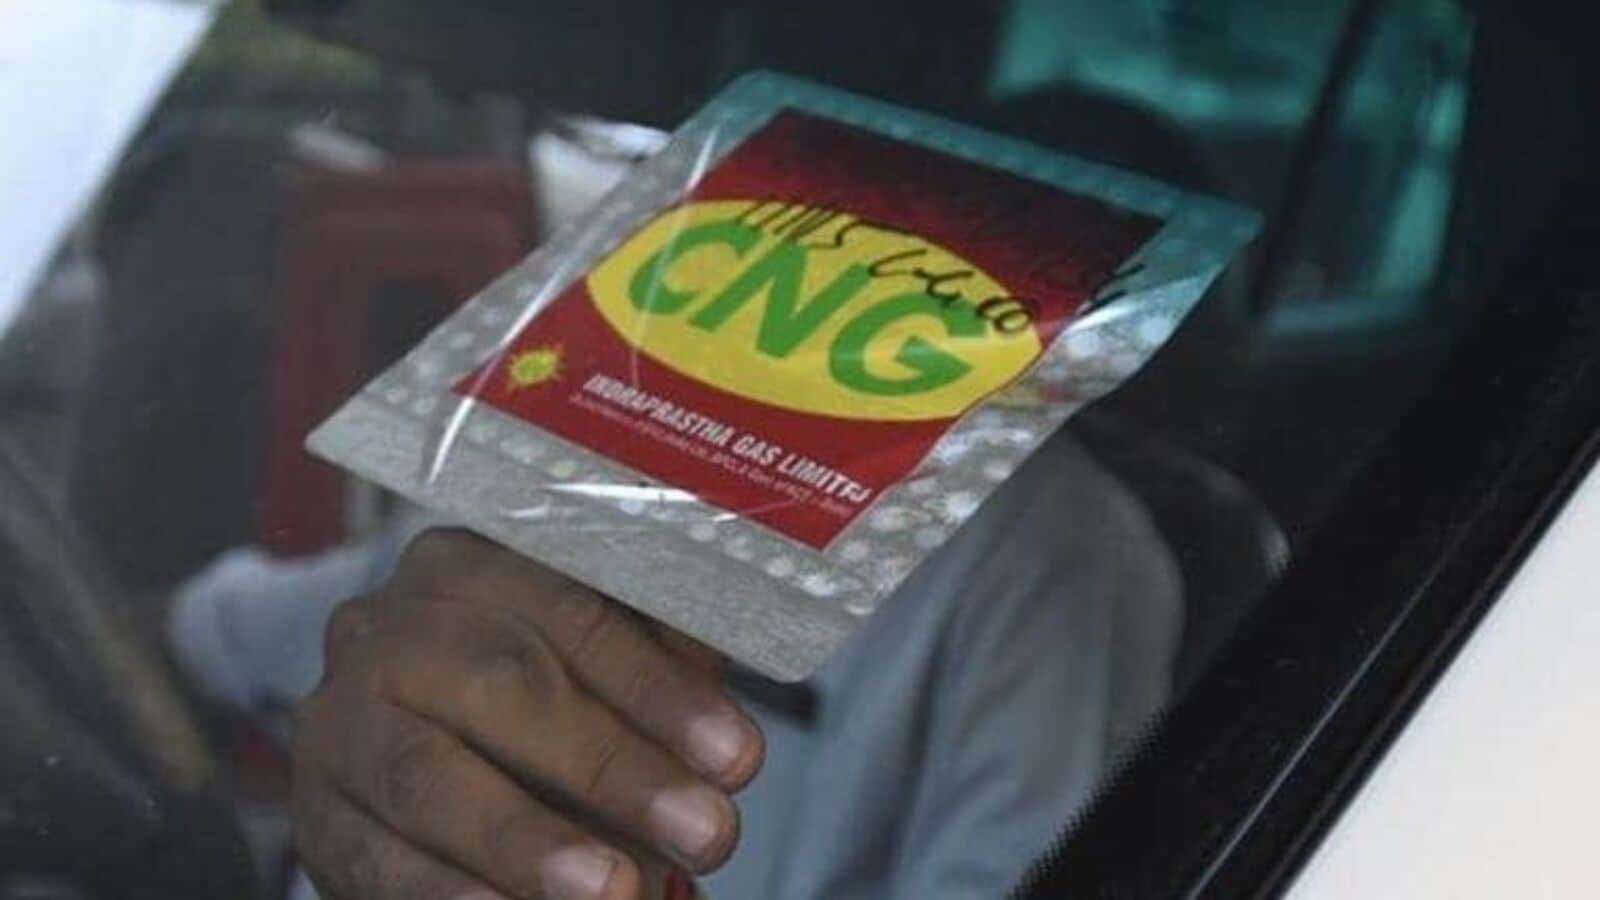 CNG becomes cheaper Delhi-NCR by ₹2.5, effective from March 7